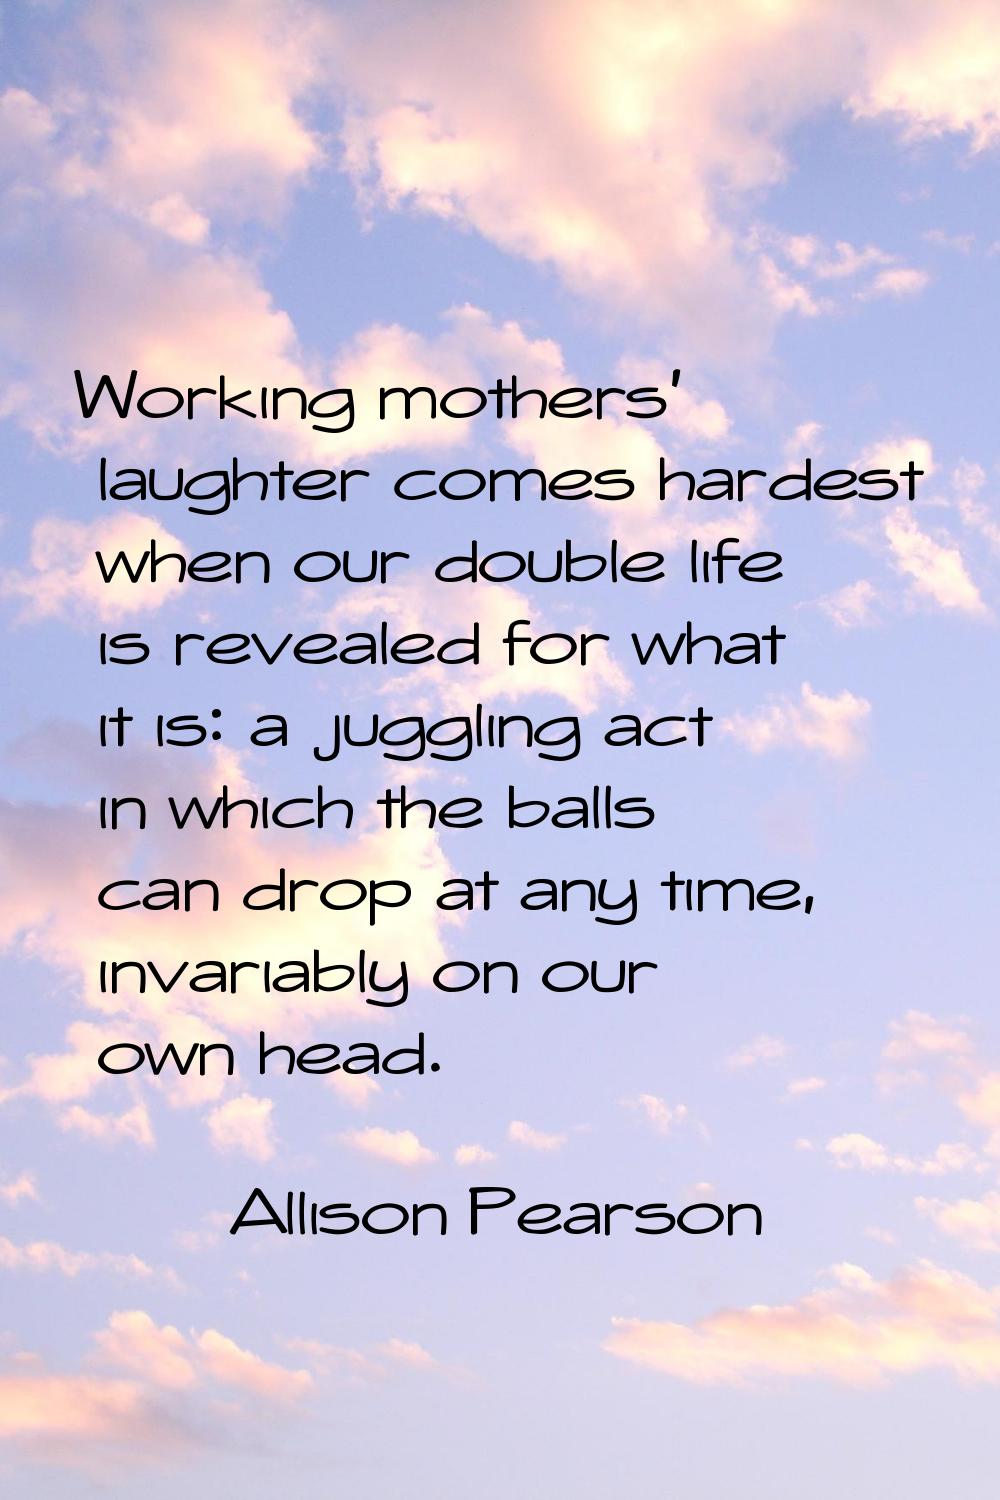 Working mothers' laughter comes hardest when our double life is revealed for what it is: a juggling